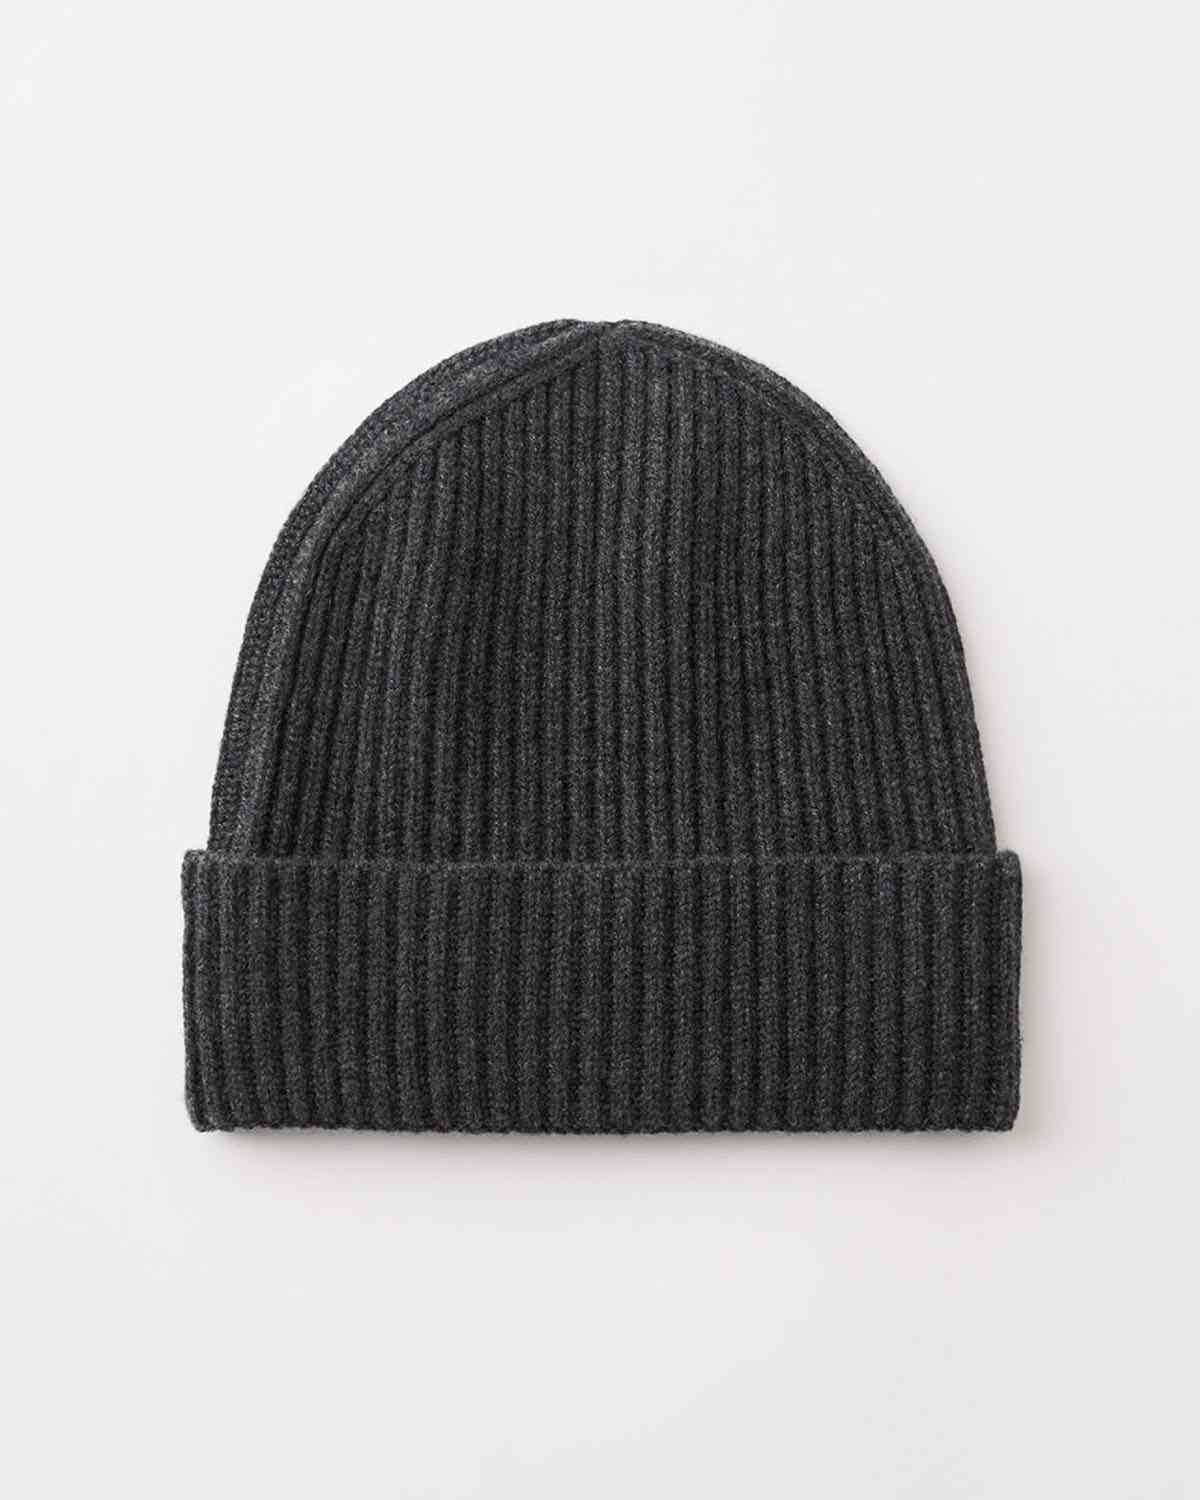 100% Cashmere Beanie/Hat. Made in Nepal
